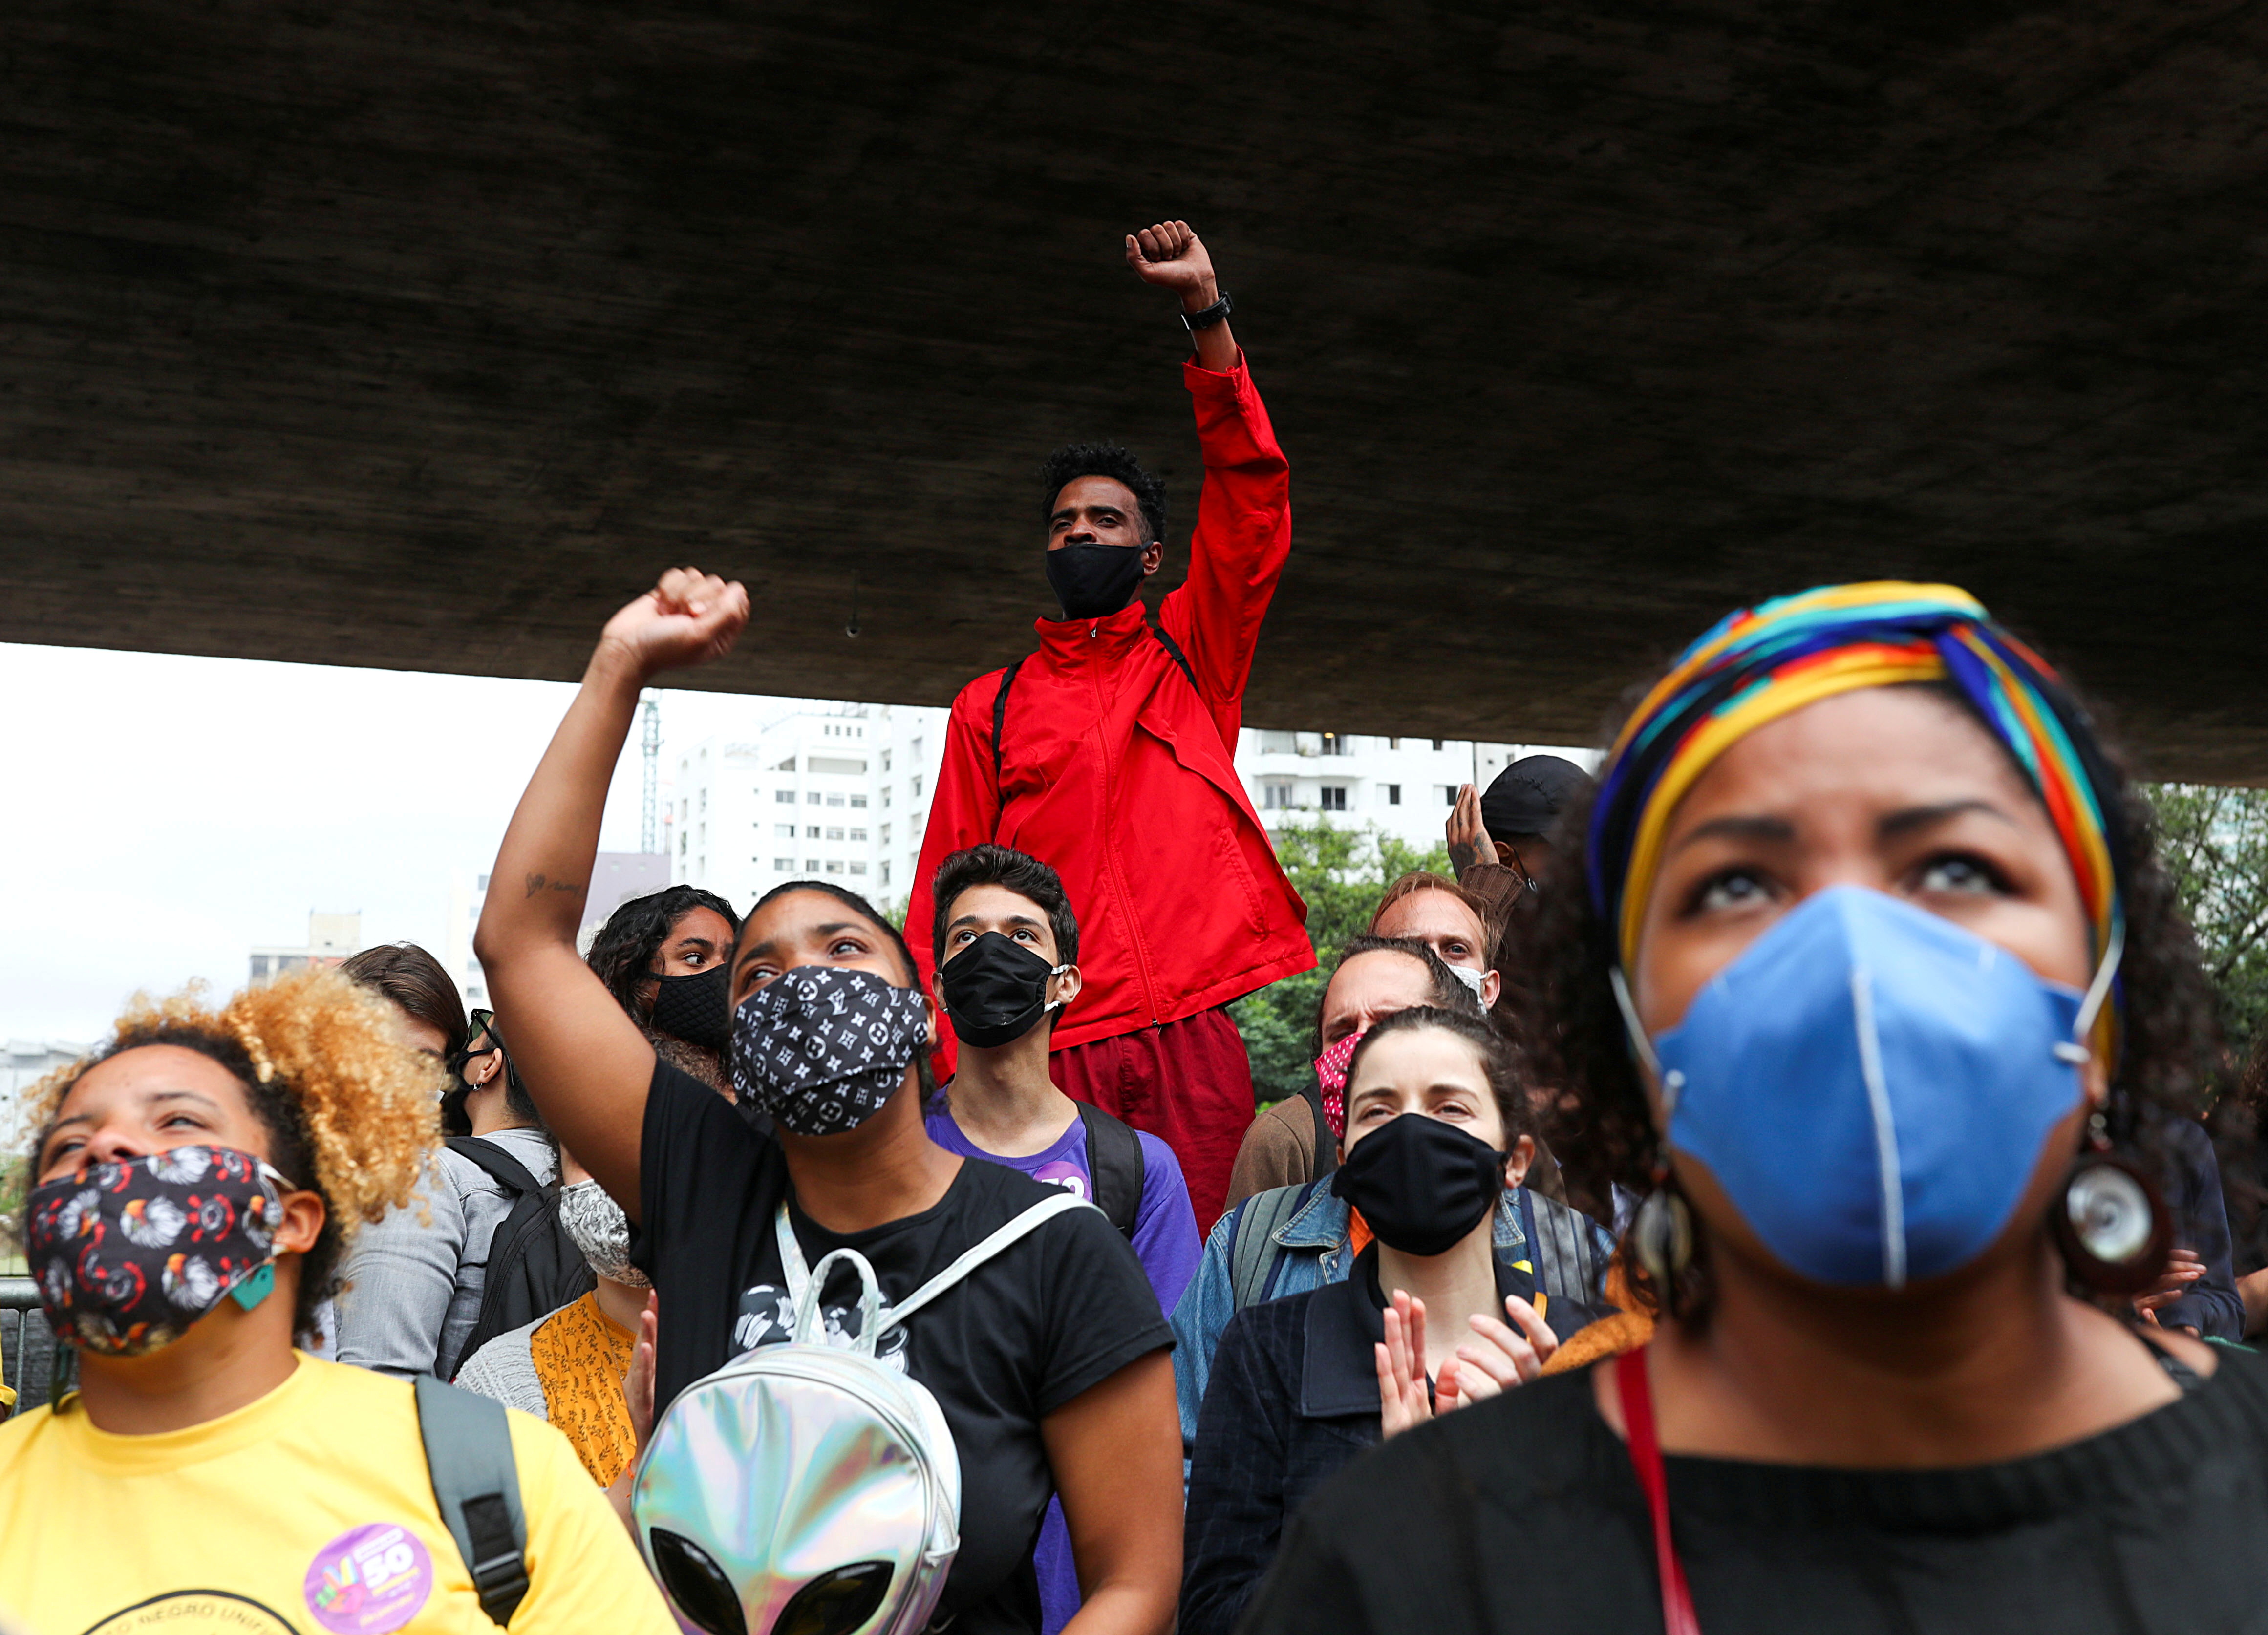 Demonstrators gesture as they march in Sao Paulo during the National Black Consciousness Day and in protest against the death of Joao Alberto Silveira Freitas, a Black man beaten to death at a market in Porto Alegre, Brazil November 20, 2020. REUTERS/Amanda Perobelli